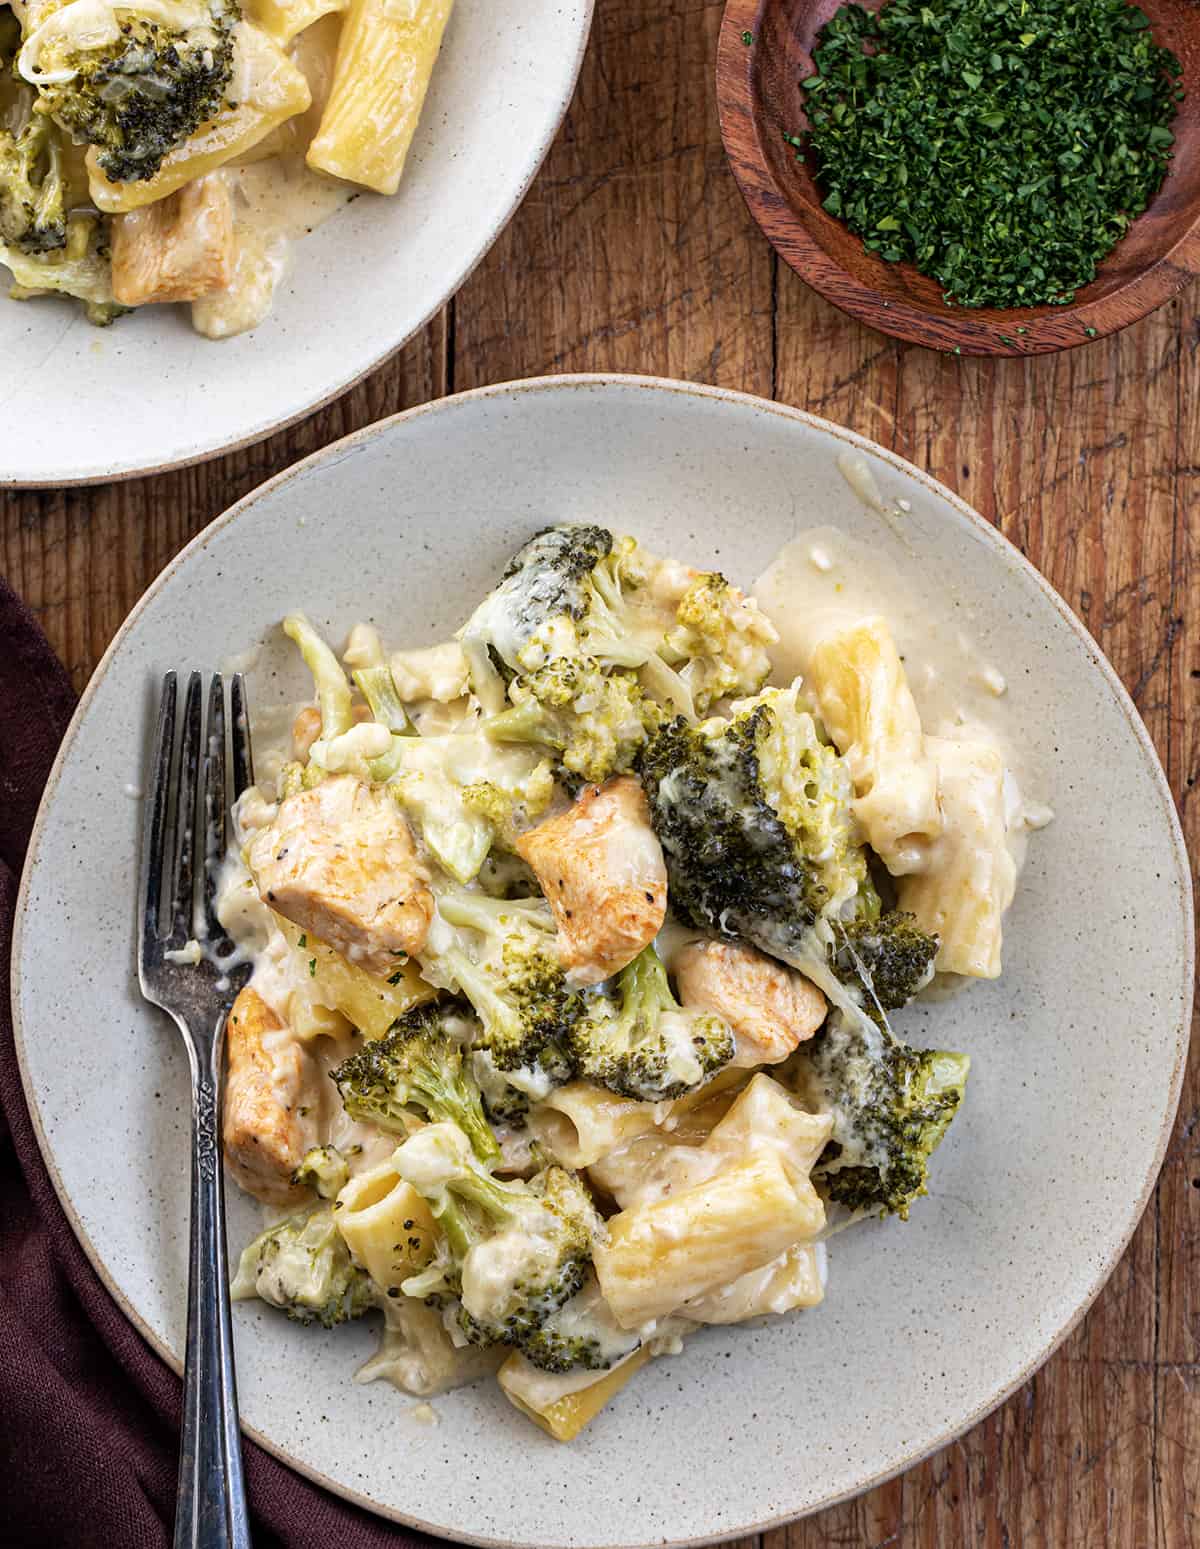 Chicken and Broccoli Pasta on a Plate on a Wooden Cutting Board.